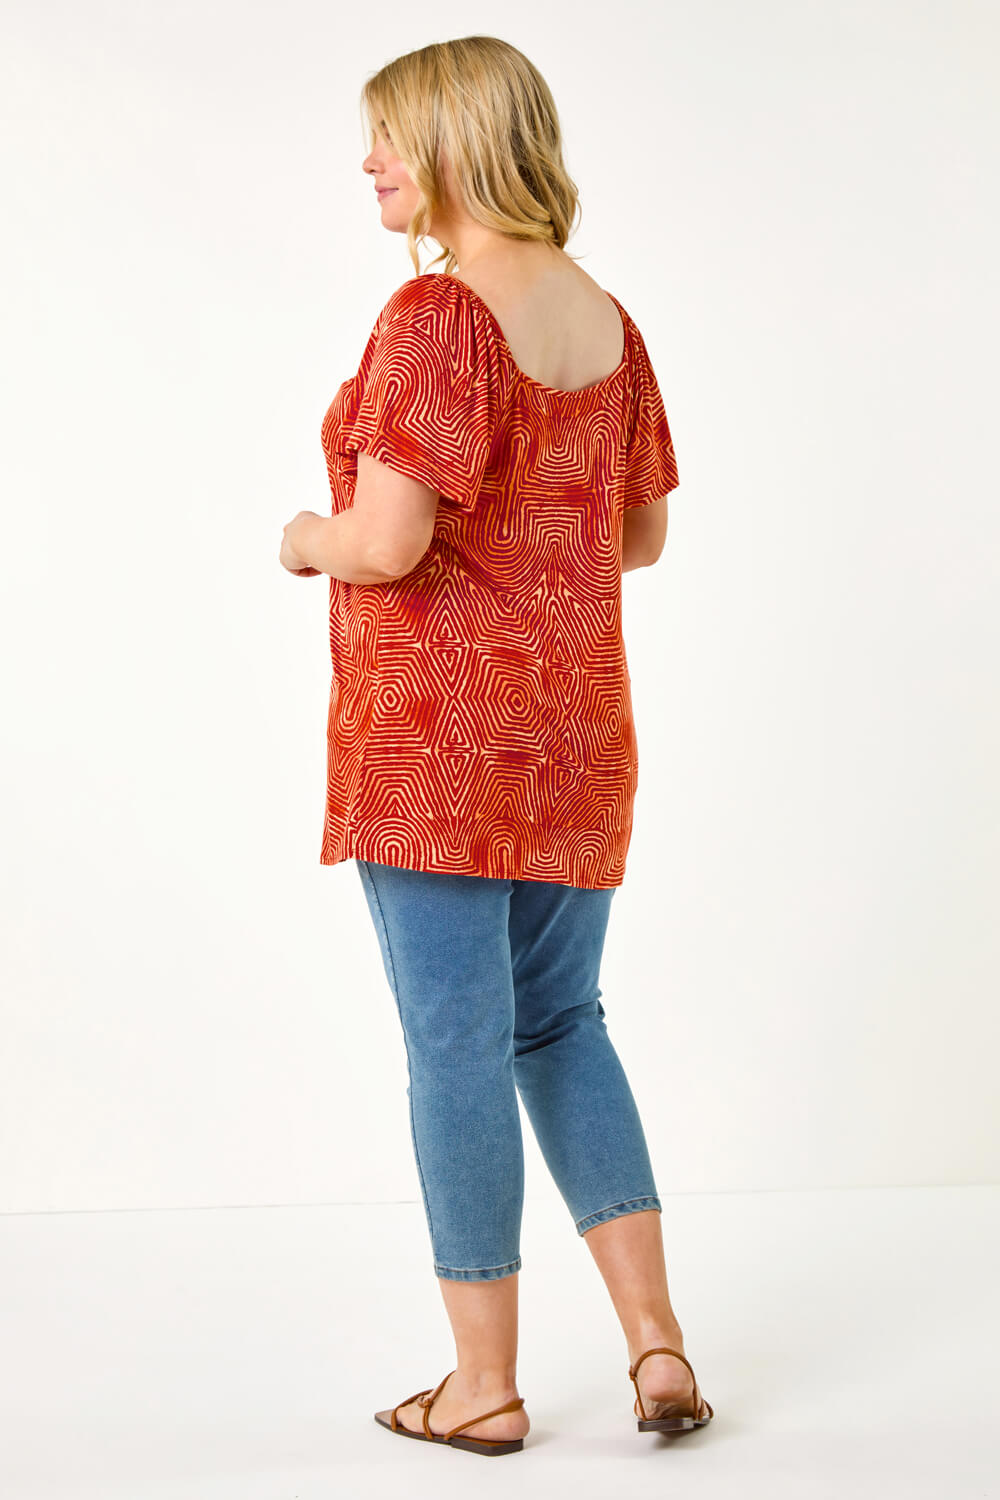 ORANGE Curve Tie Front Abstract Stretch Top, Image 3 of 5